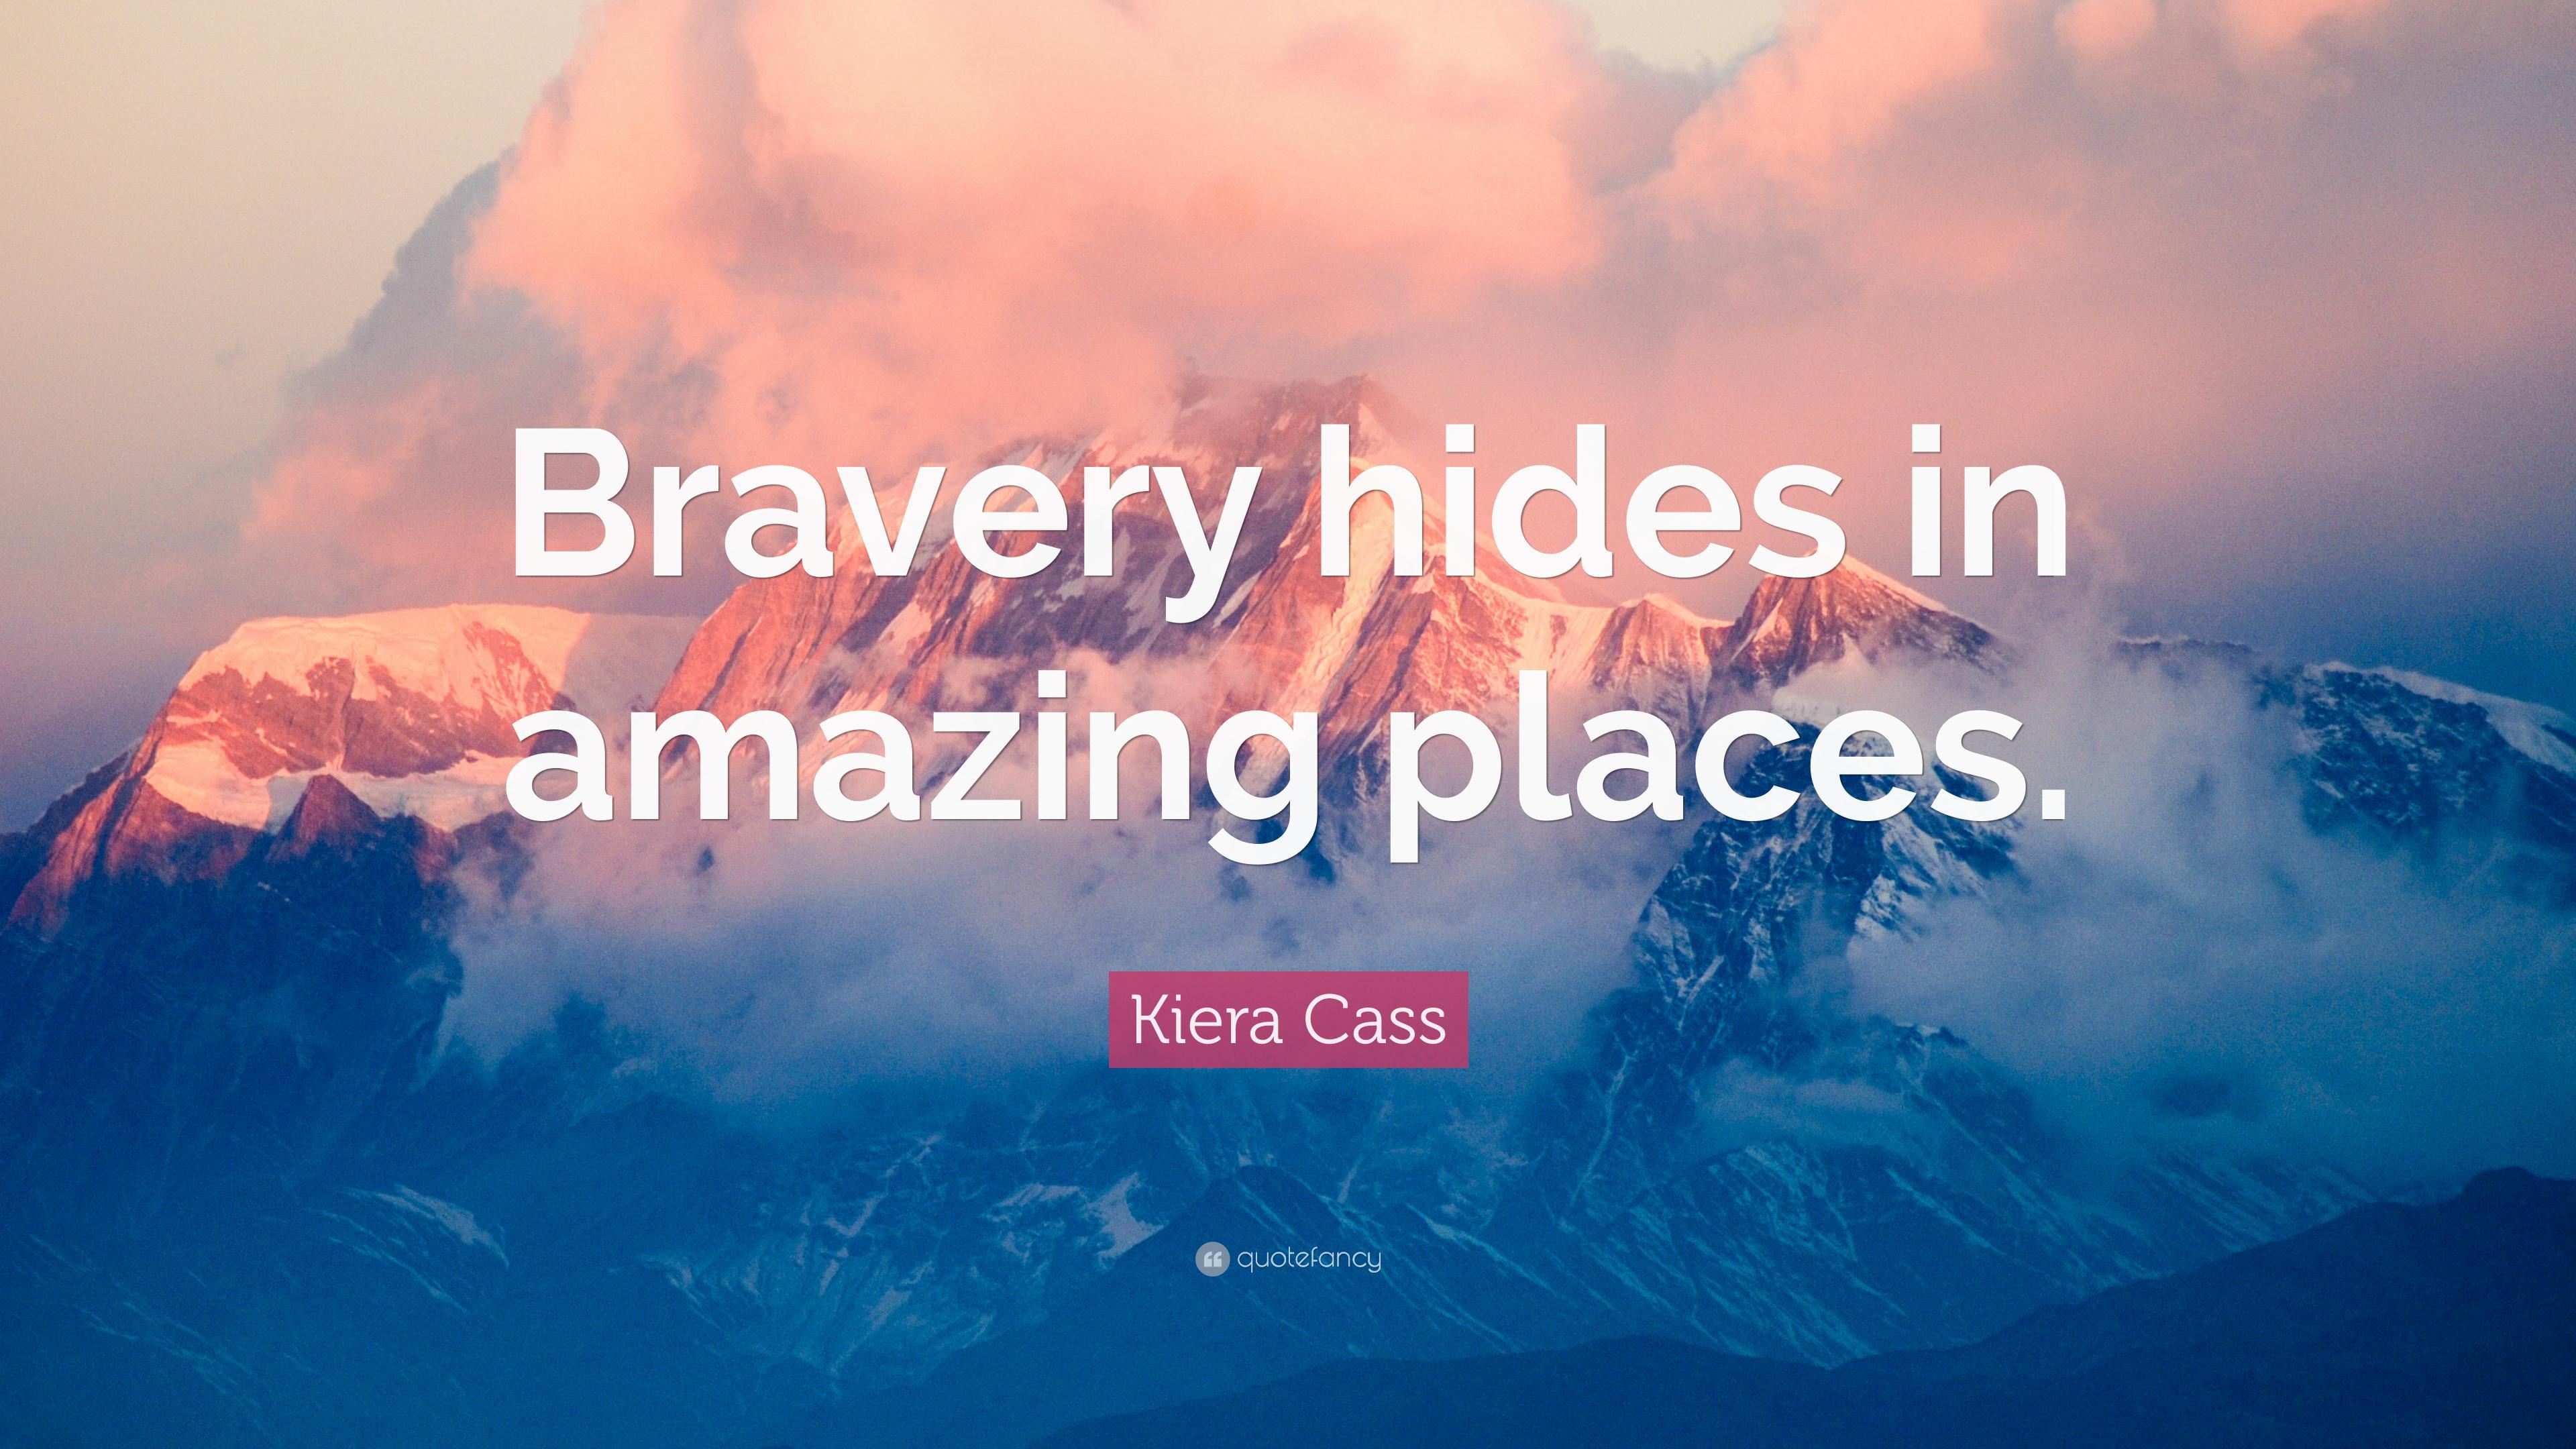 Kiera Cass Quote: “Bravery hides in amazing places.” 10